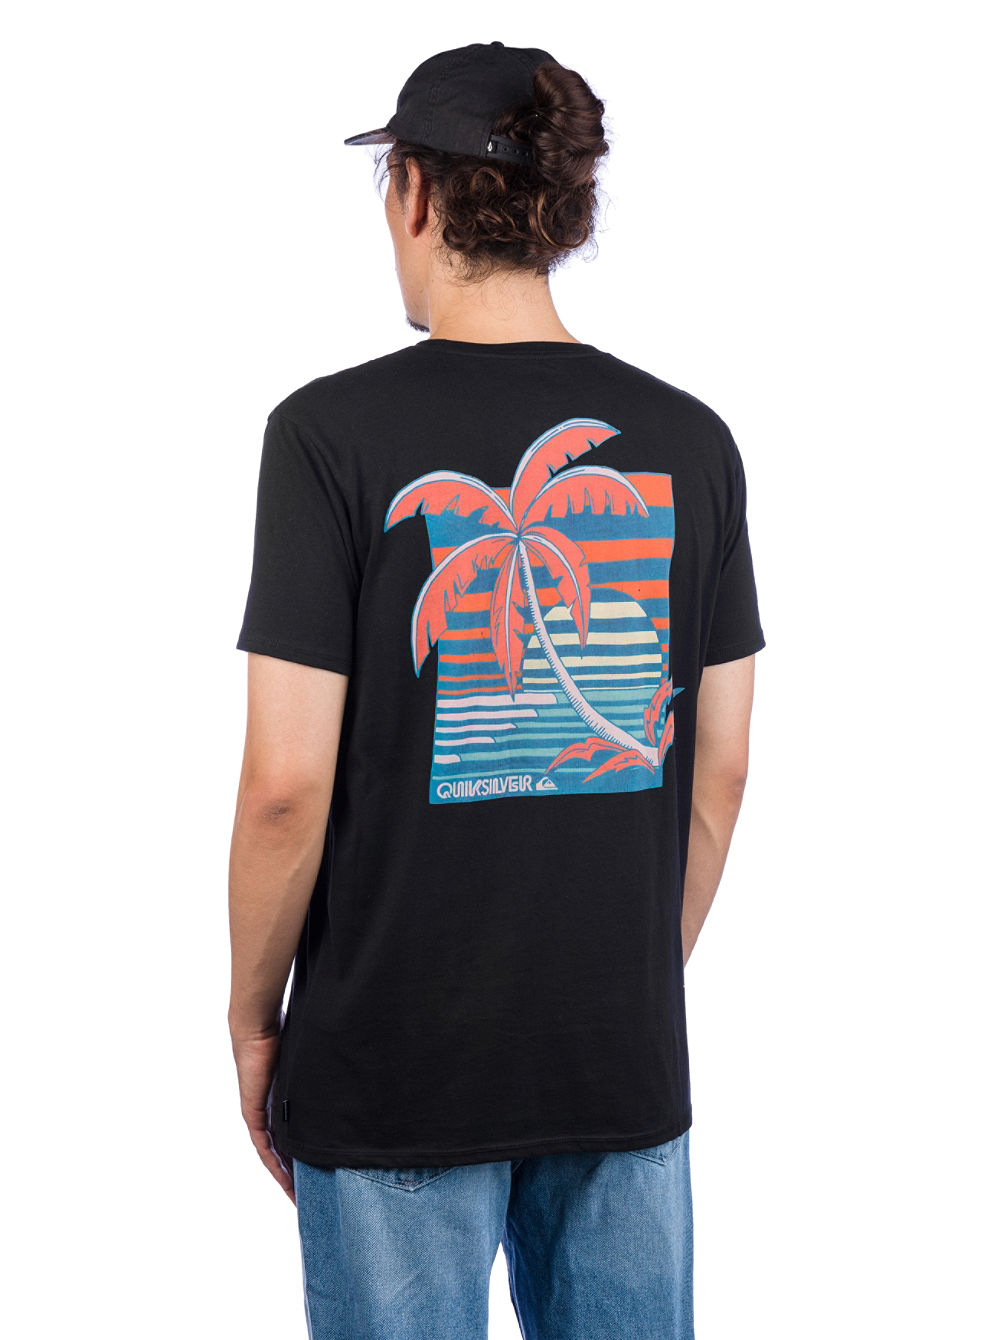 In The Jungle T-shirt